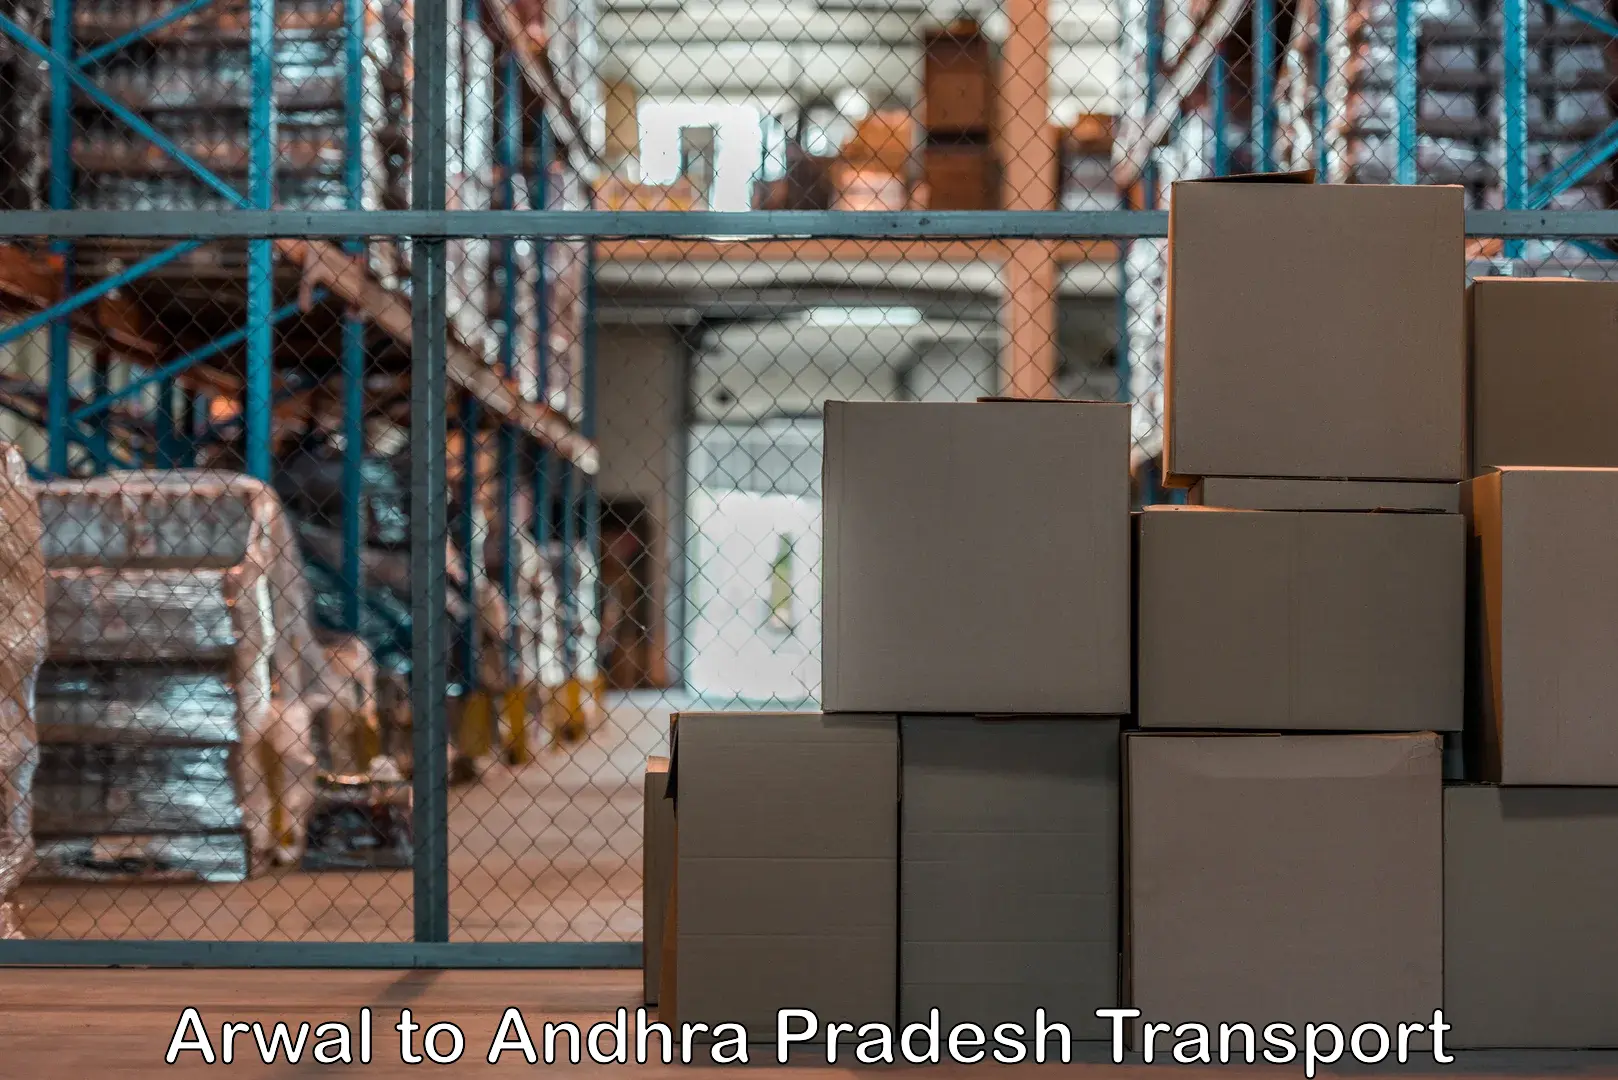 Transportation services in Arwal to Tripuranthakam